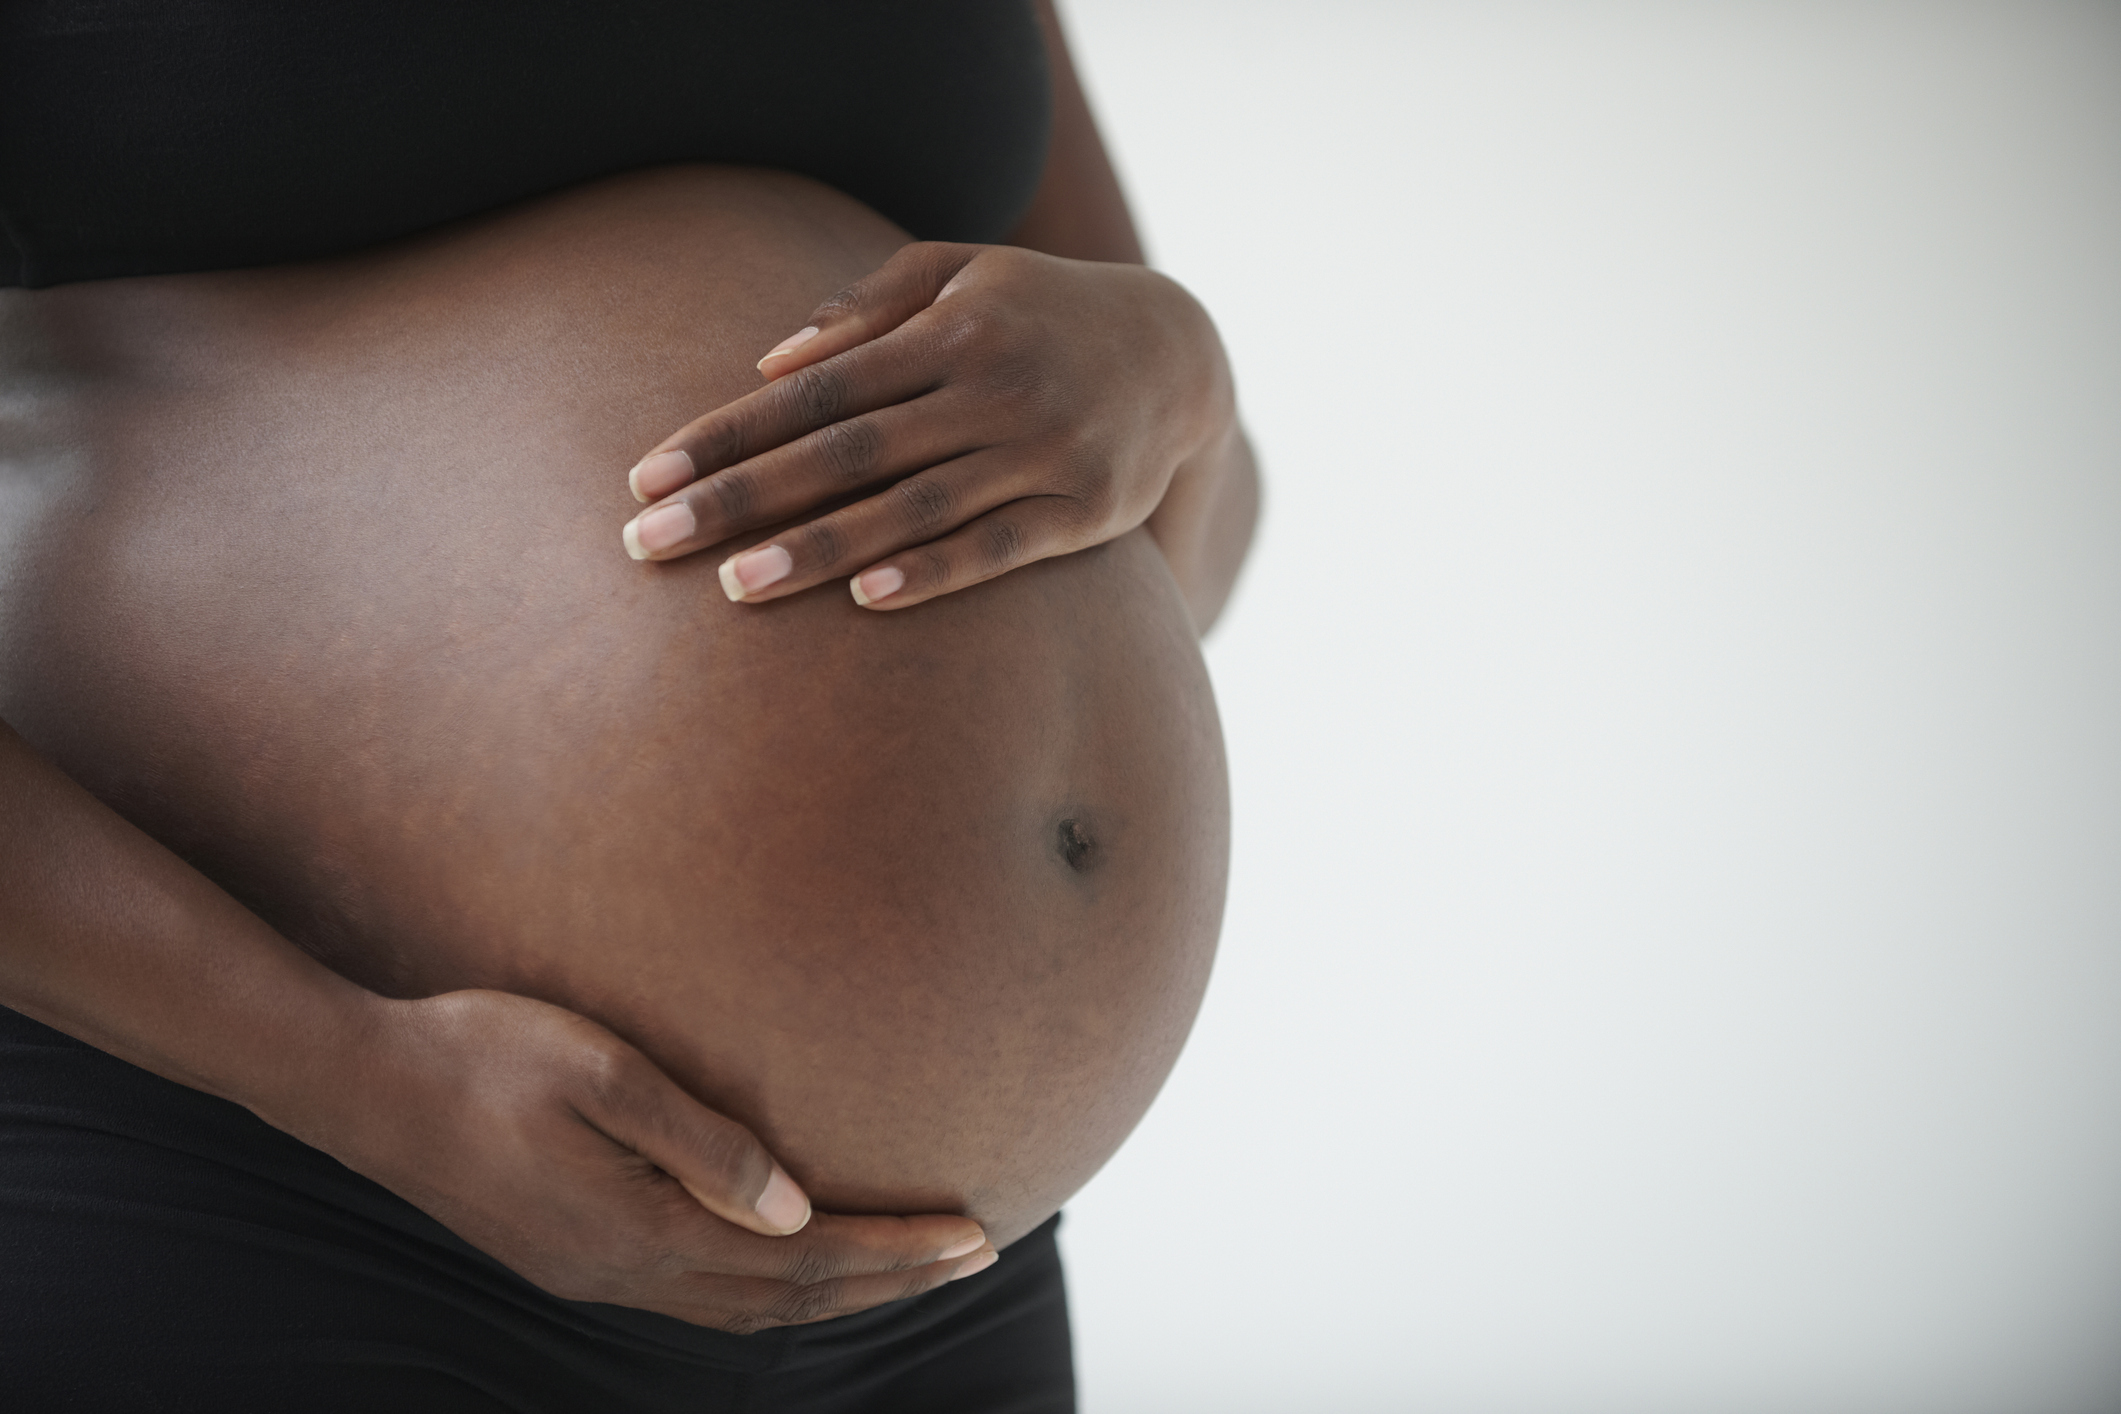 Black Women Are 2.5 Times More Likely to Die During Childbirth Than White Woman, Study Finds